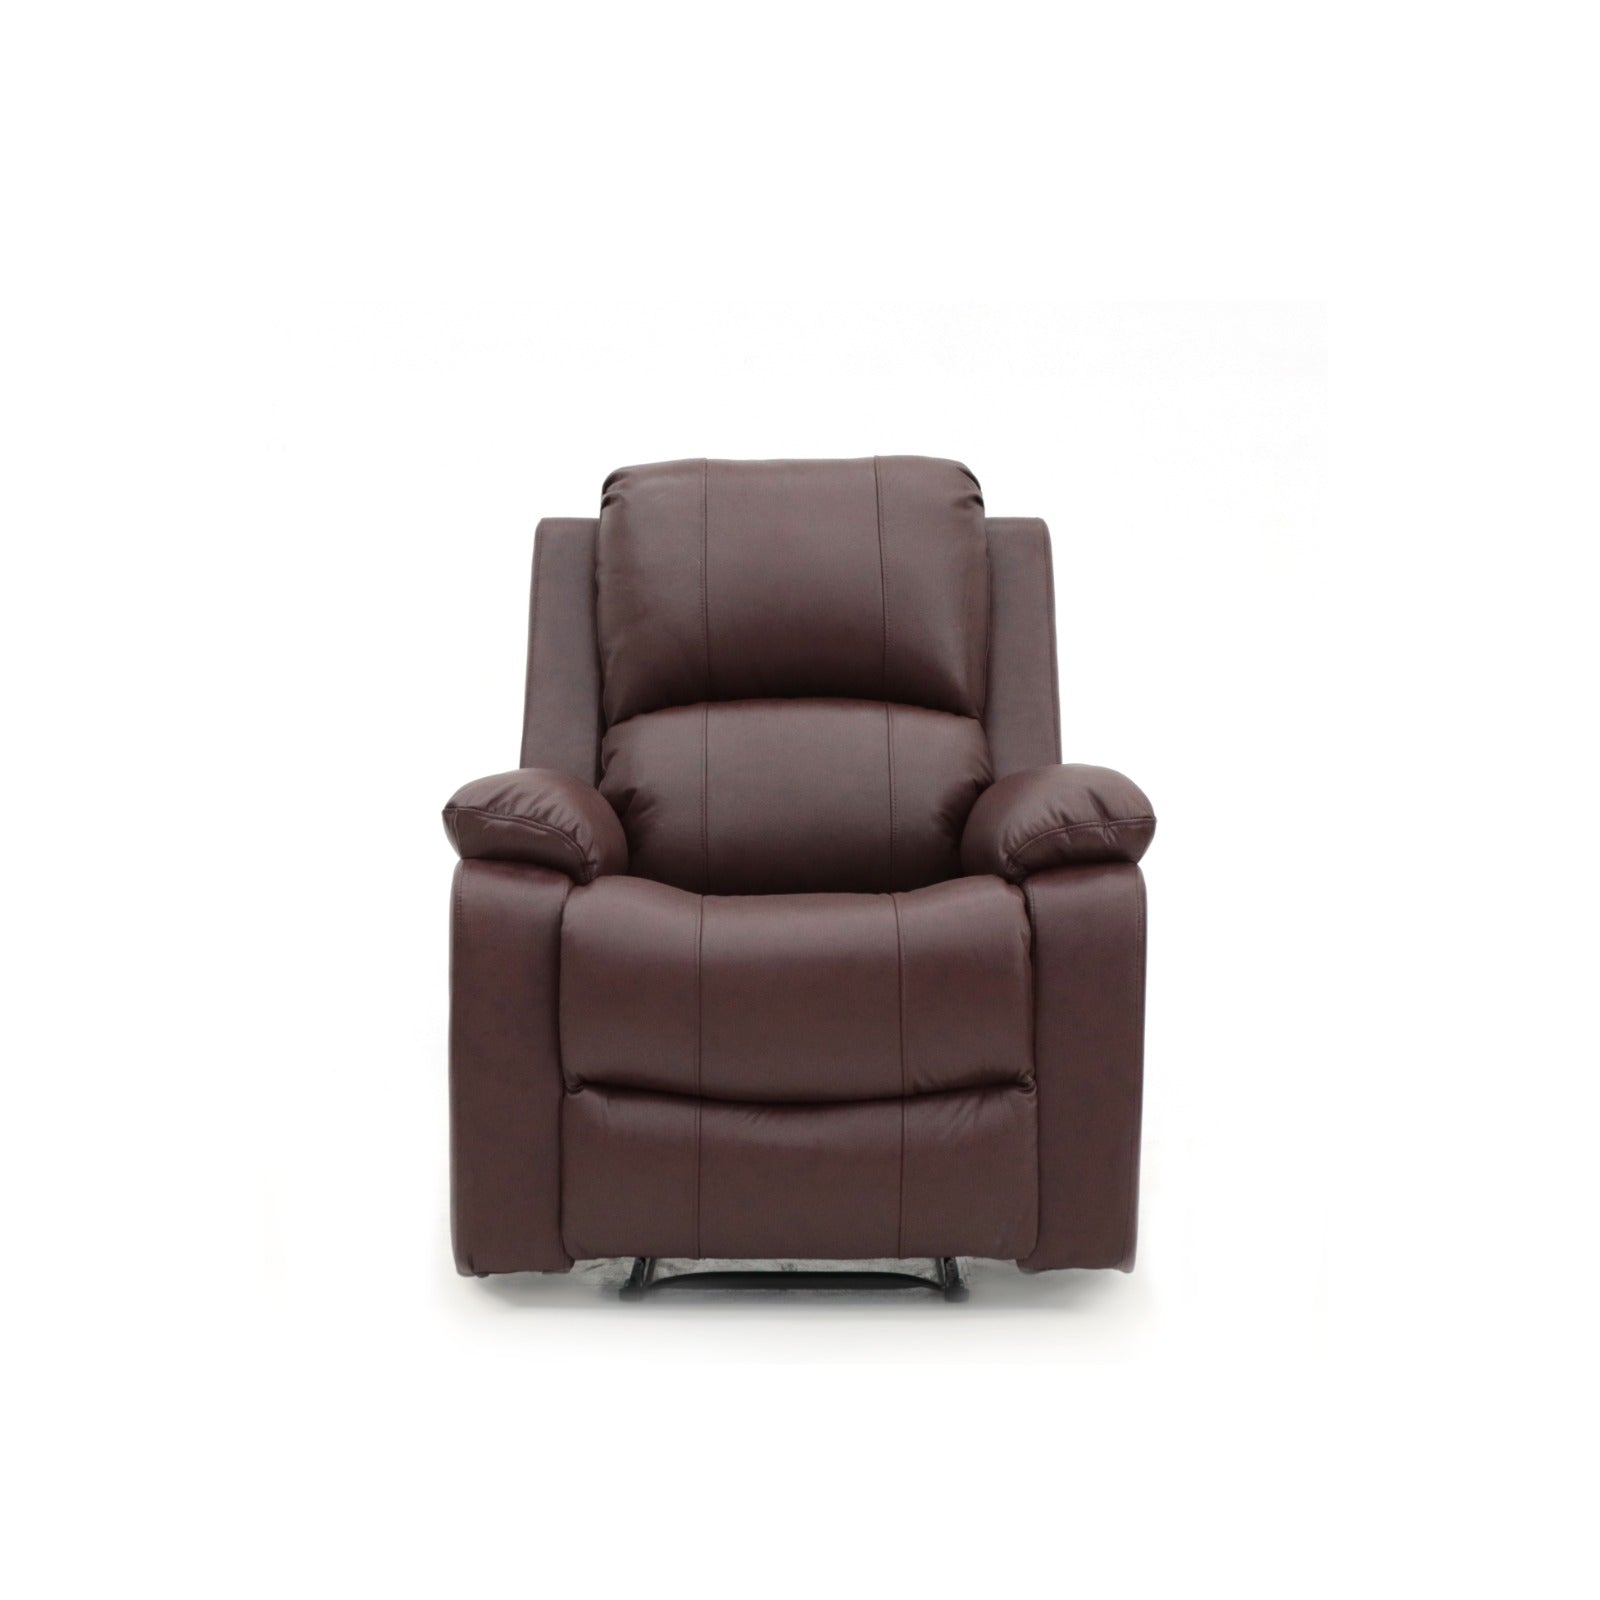 Aston Manual Recliner Chair Chestnut Leather